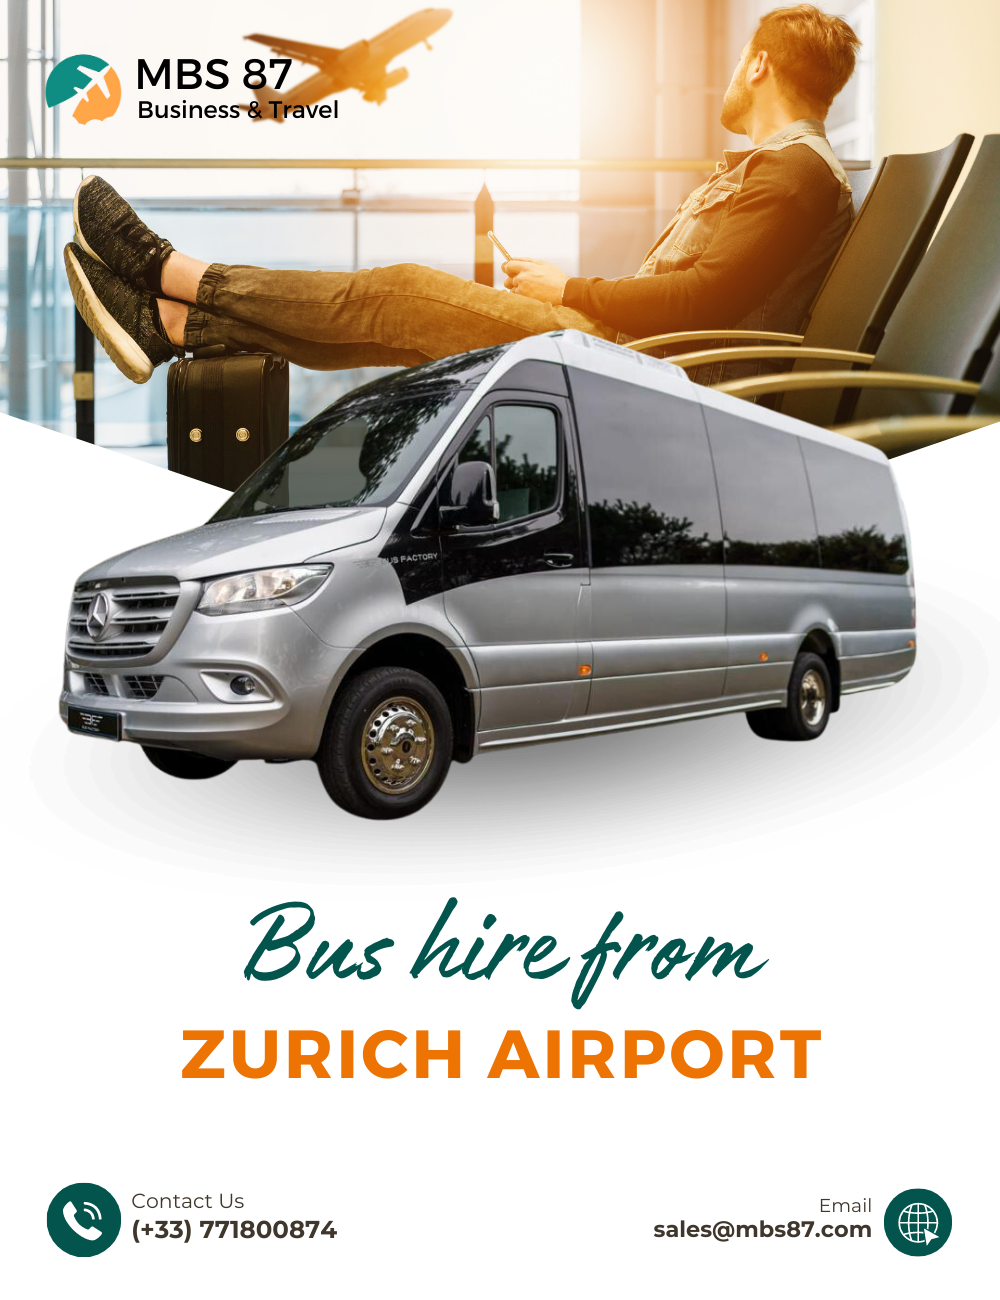 Top 5 Benefits of Using an Airport Transfer Service in Zurich